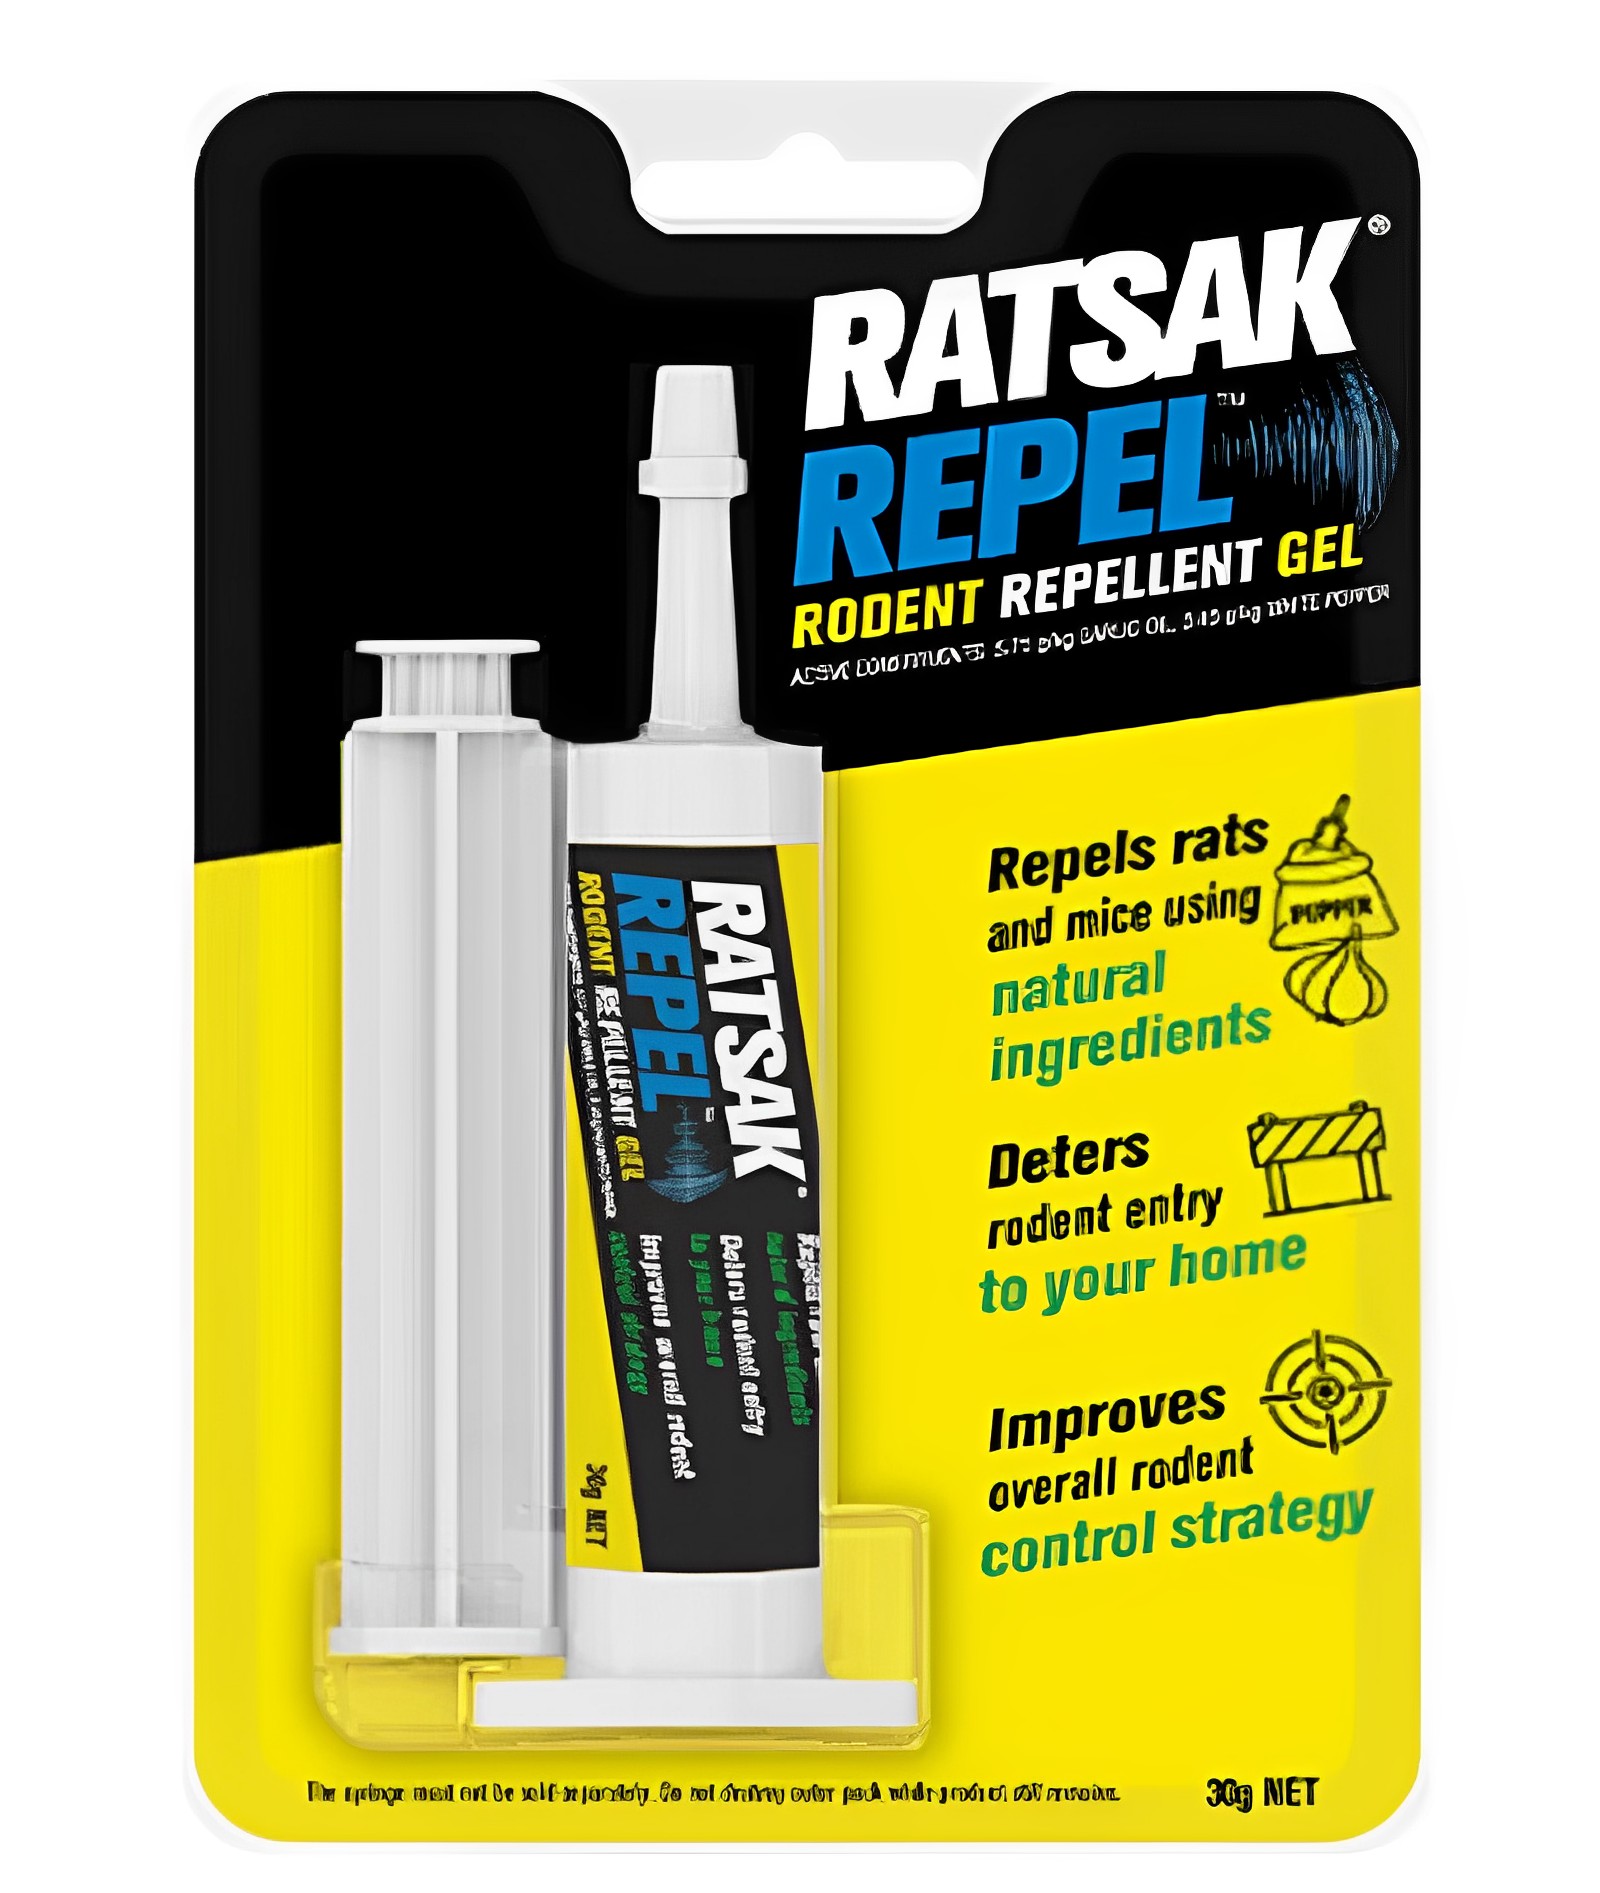 Rodent Control Strategies